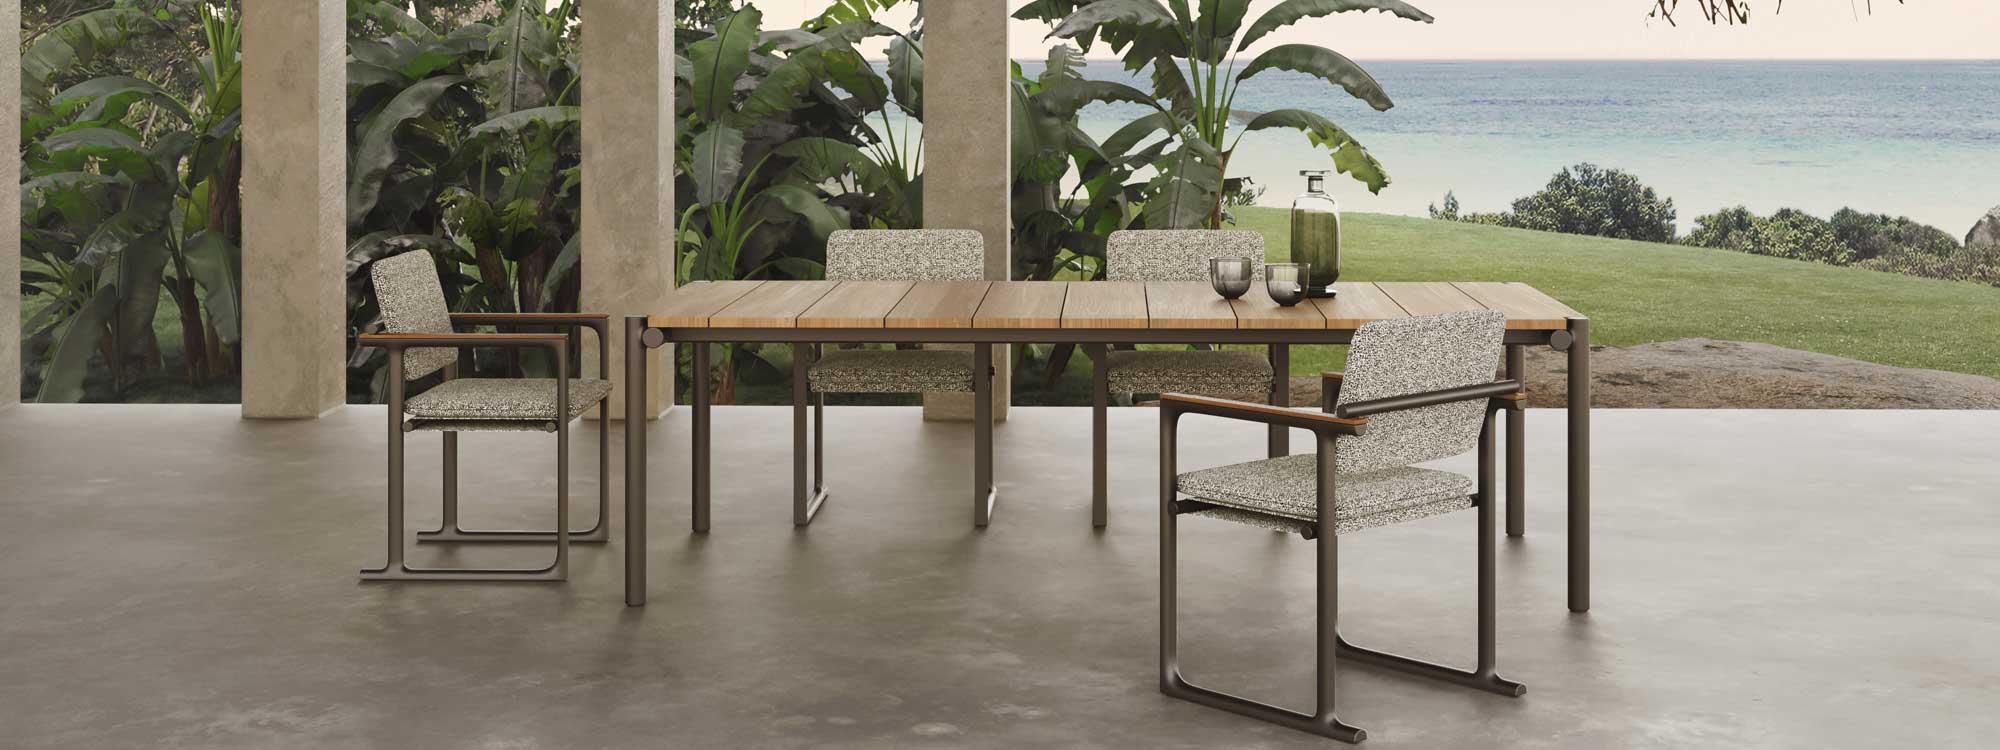 Image of Vondom Tulum modern garden dining set on terrace with banana plants, lawn and sea in the background